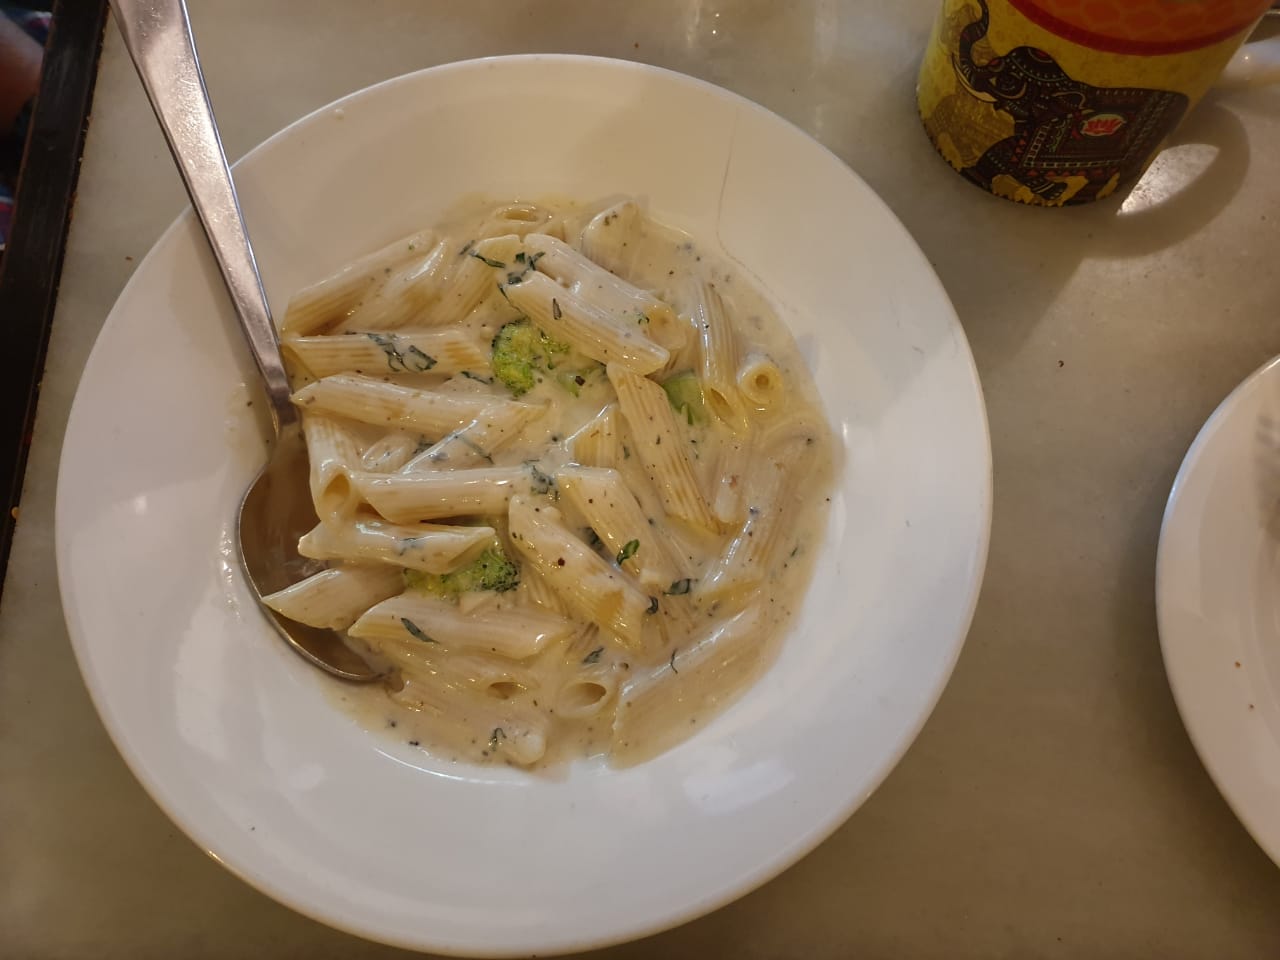 Penne with sundried tomatoes and broccoli in garlic cream